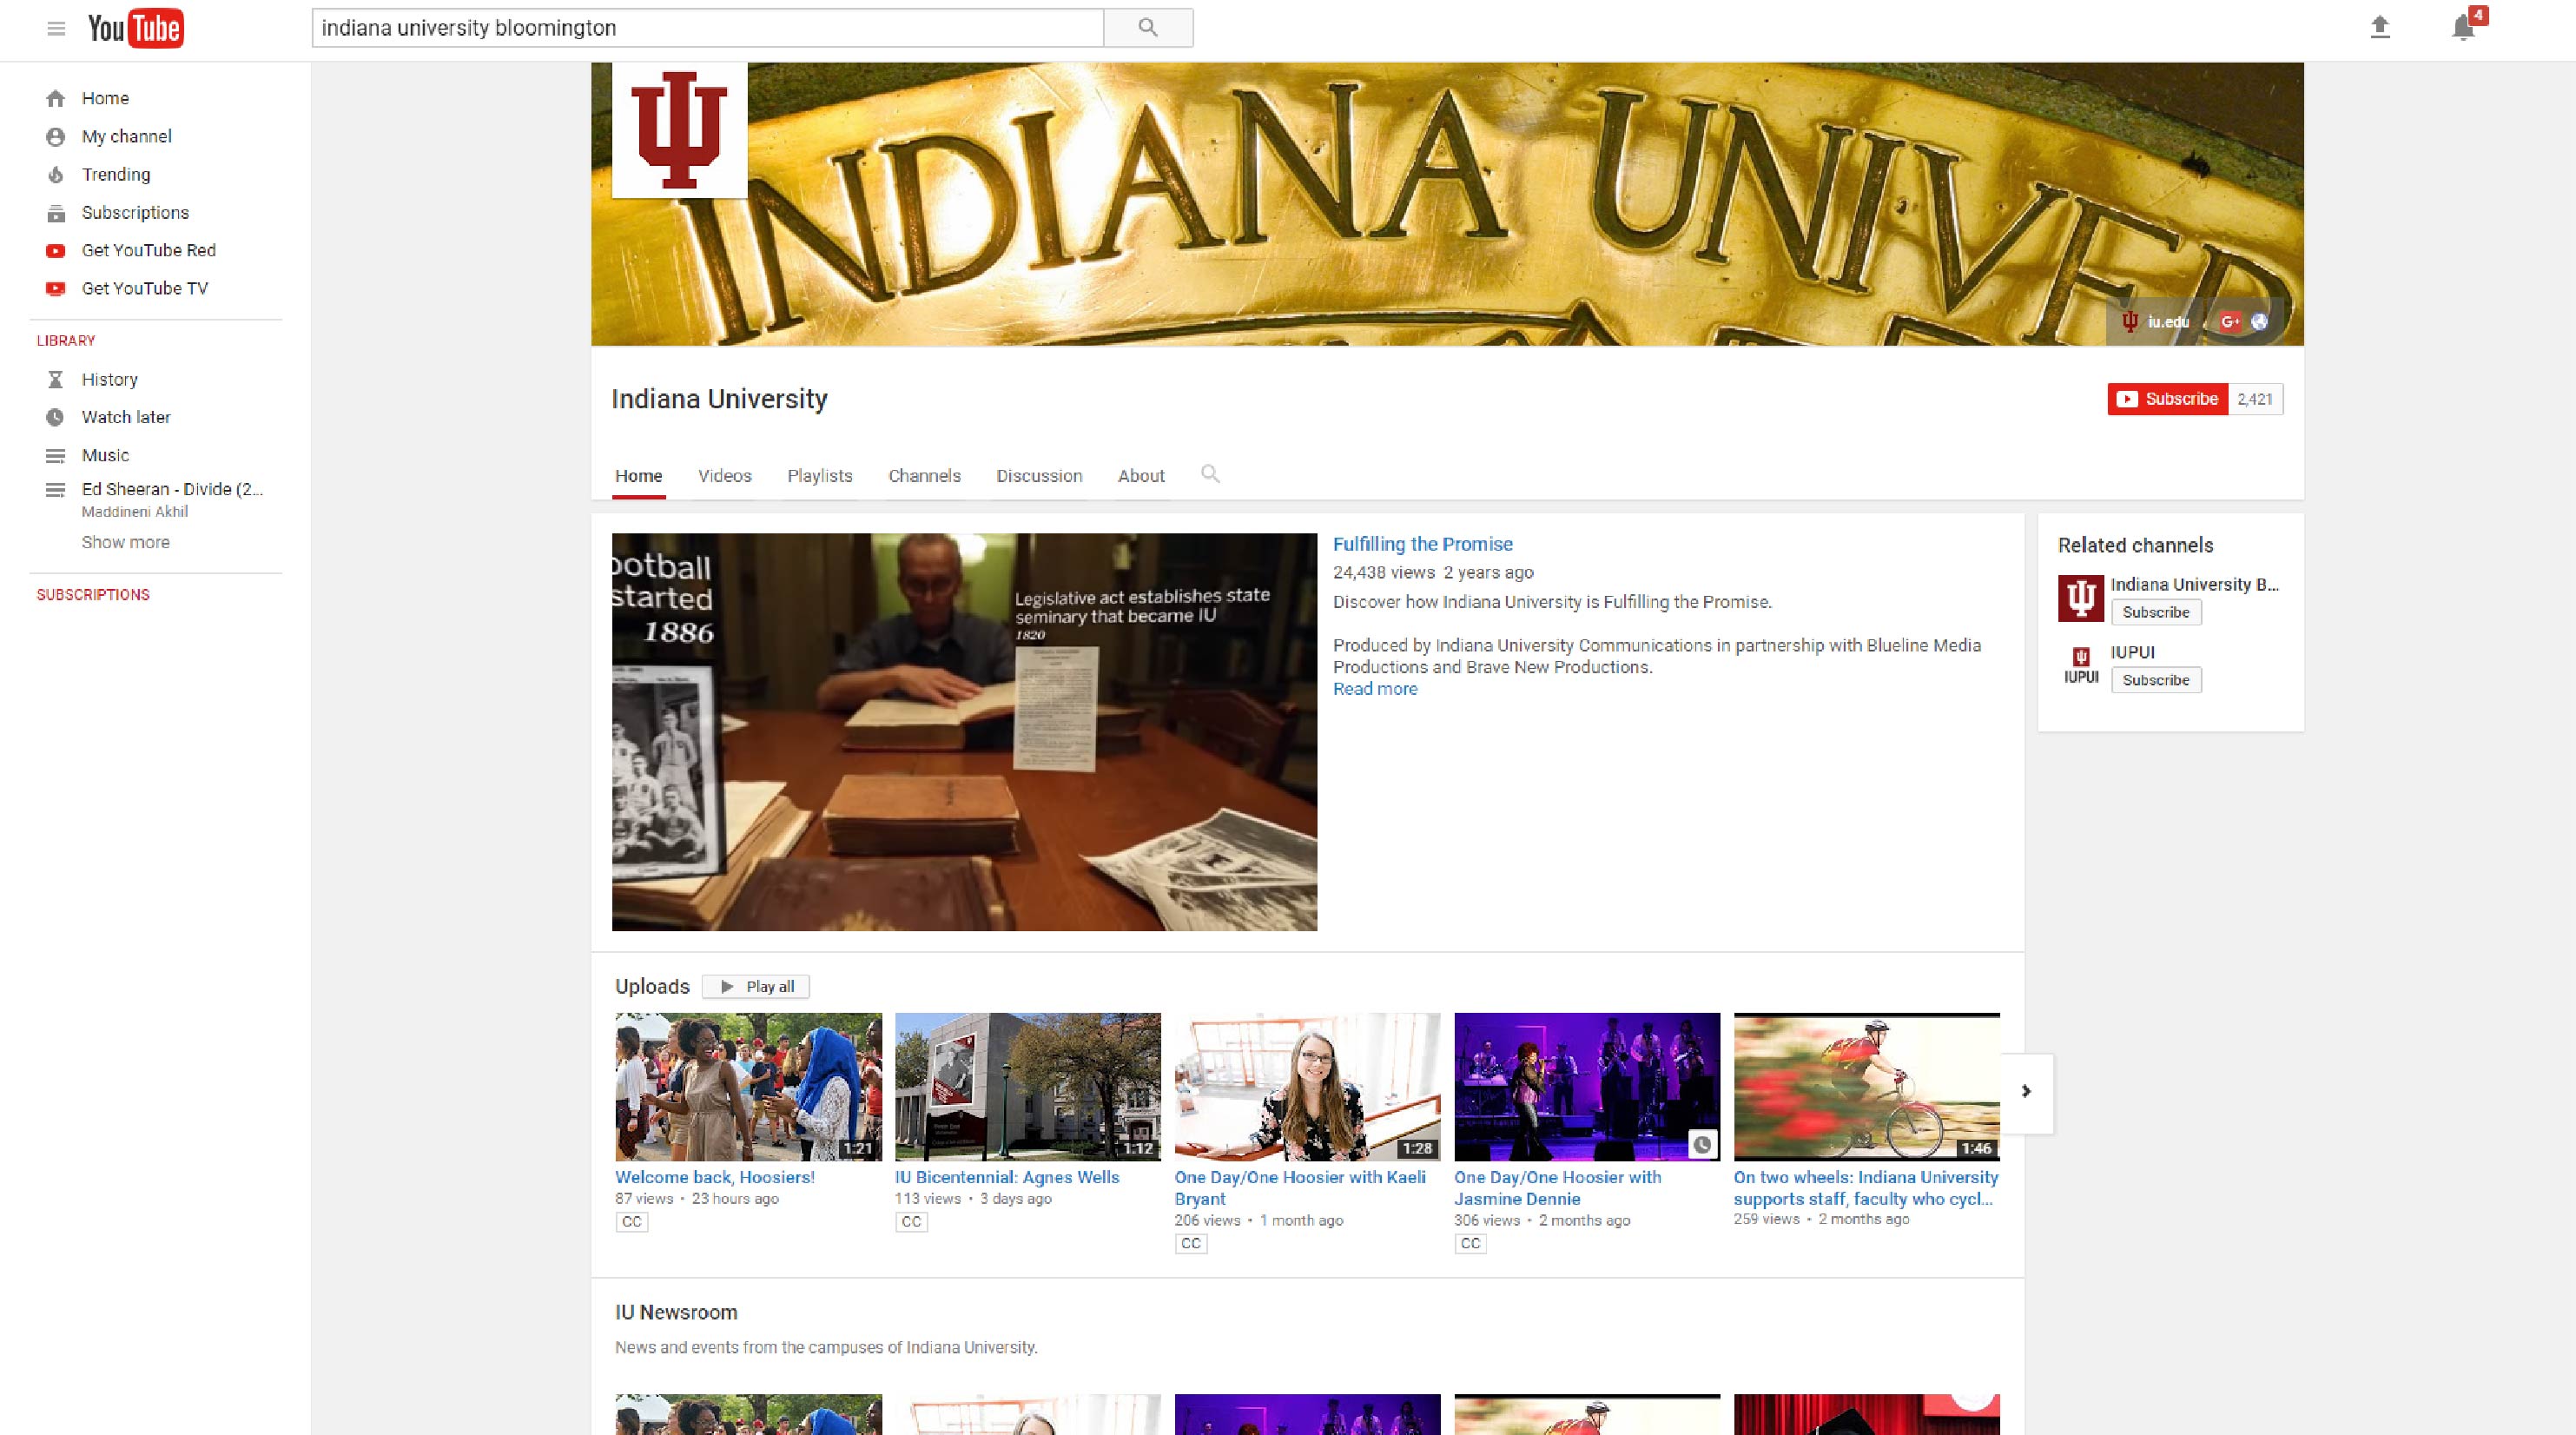 An image of Indiana University's official YouTube channel.